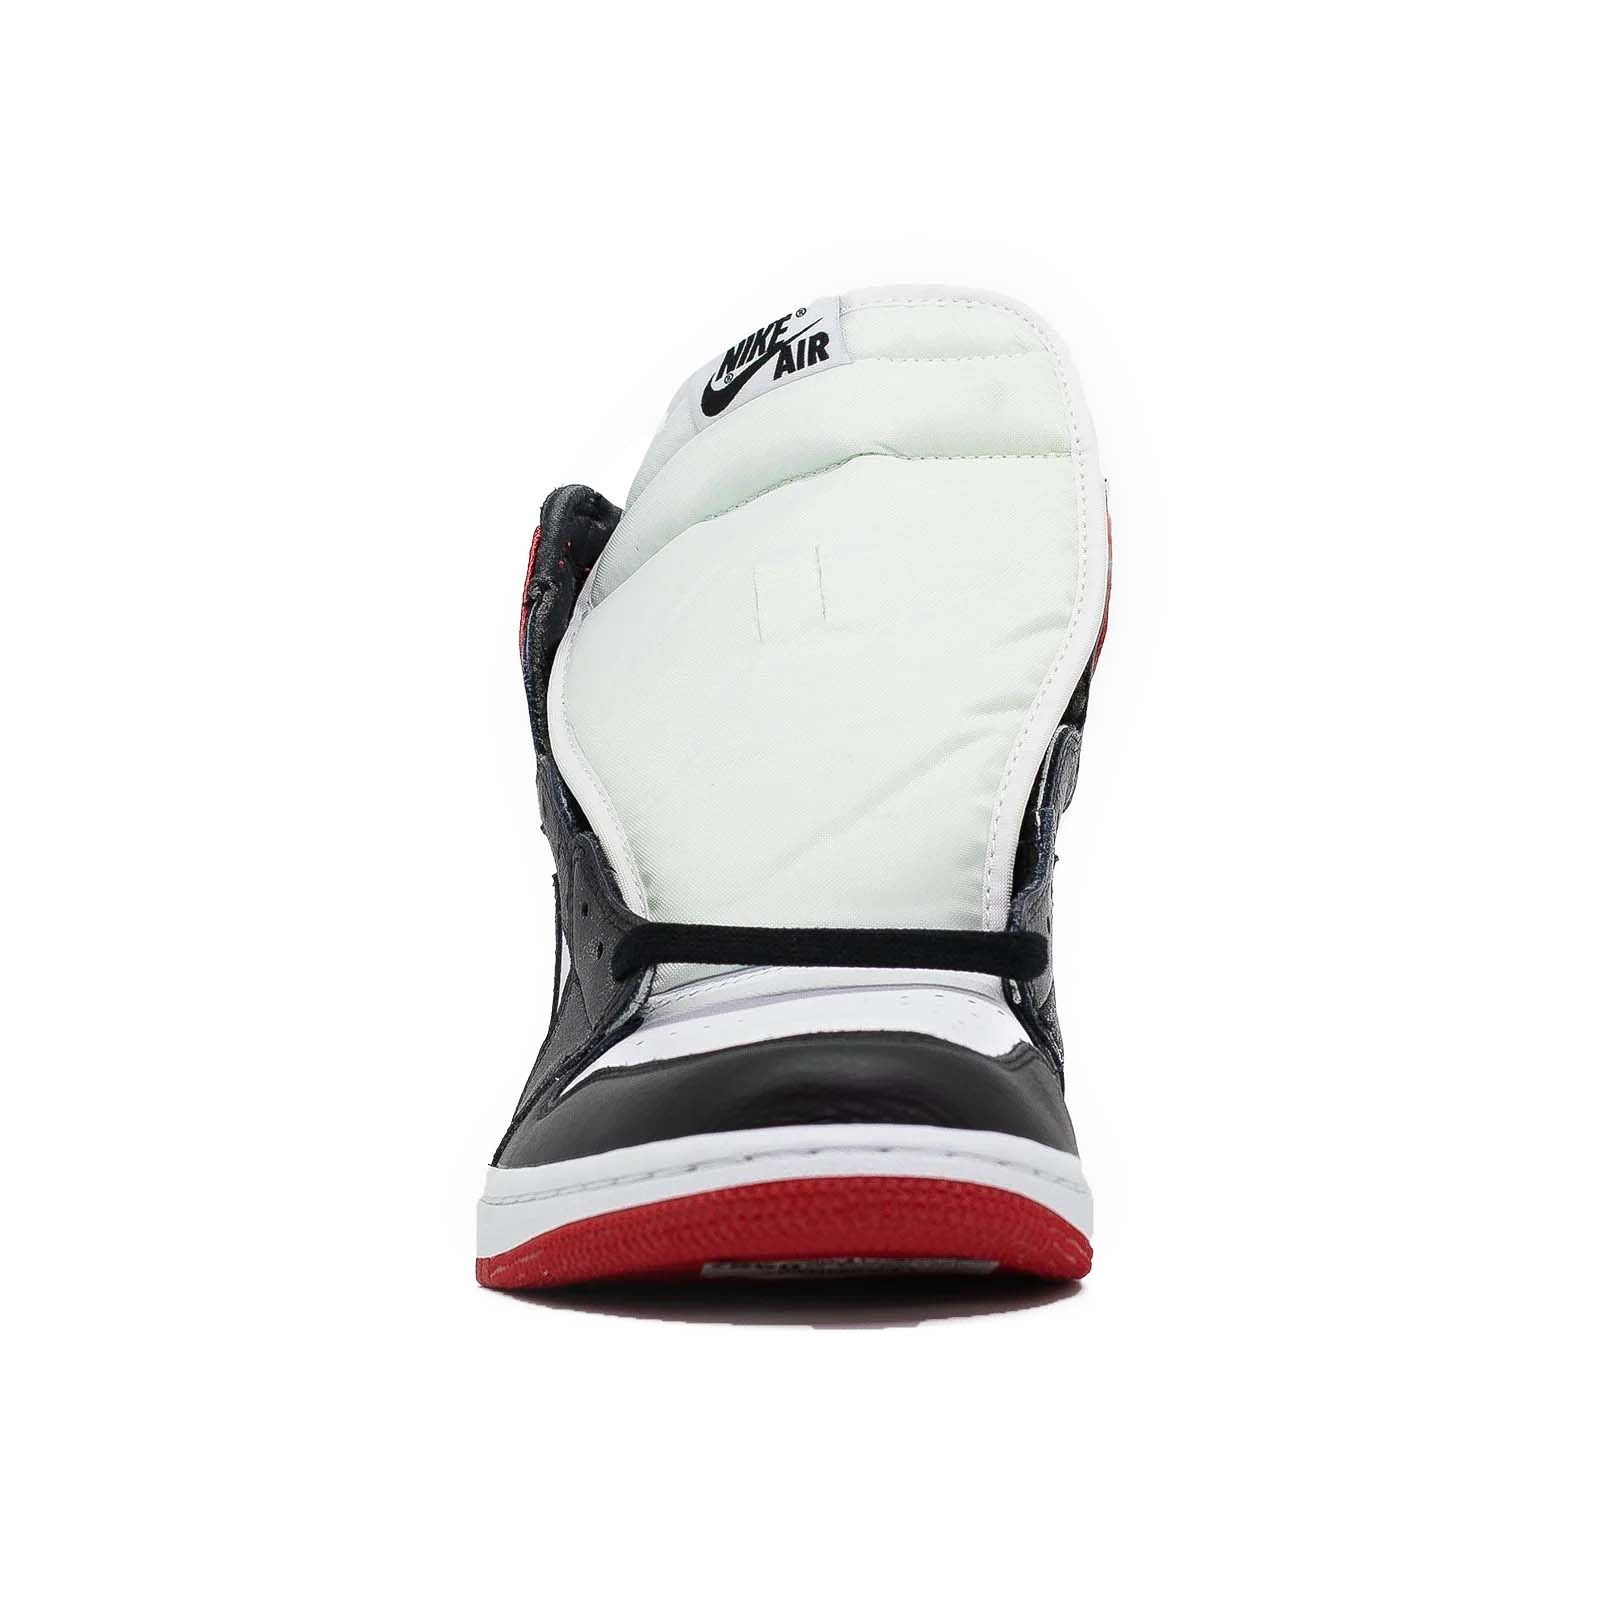 Women's Air That one time when Sheck jumped over Jordan with the DB Jordan 4s, Satin Black Toe